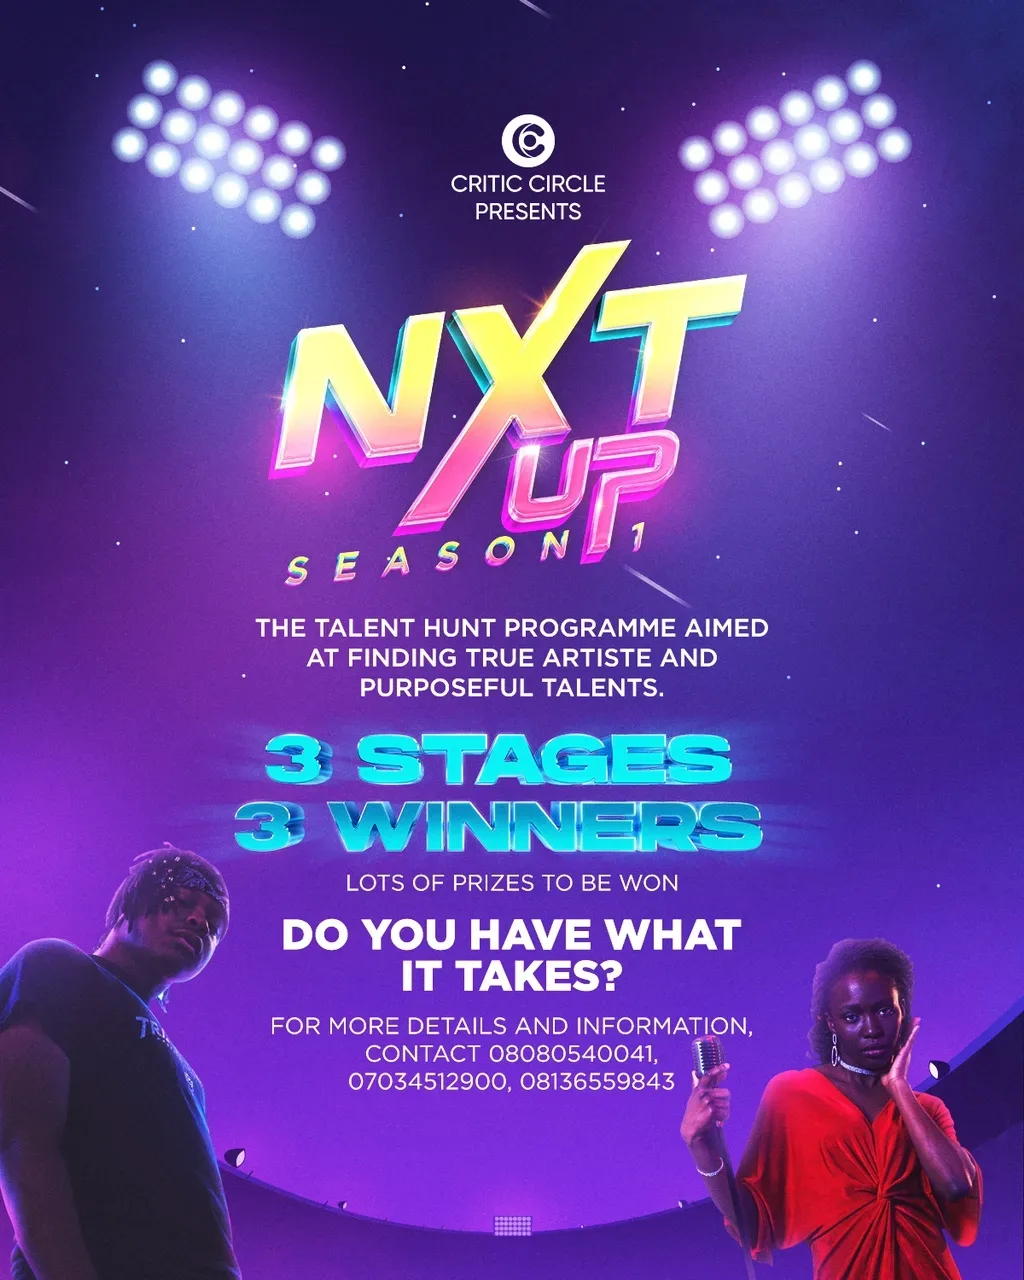 Introducing NxtUp - Season 1: A Talent Hunt Program for Emerging Artistes